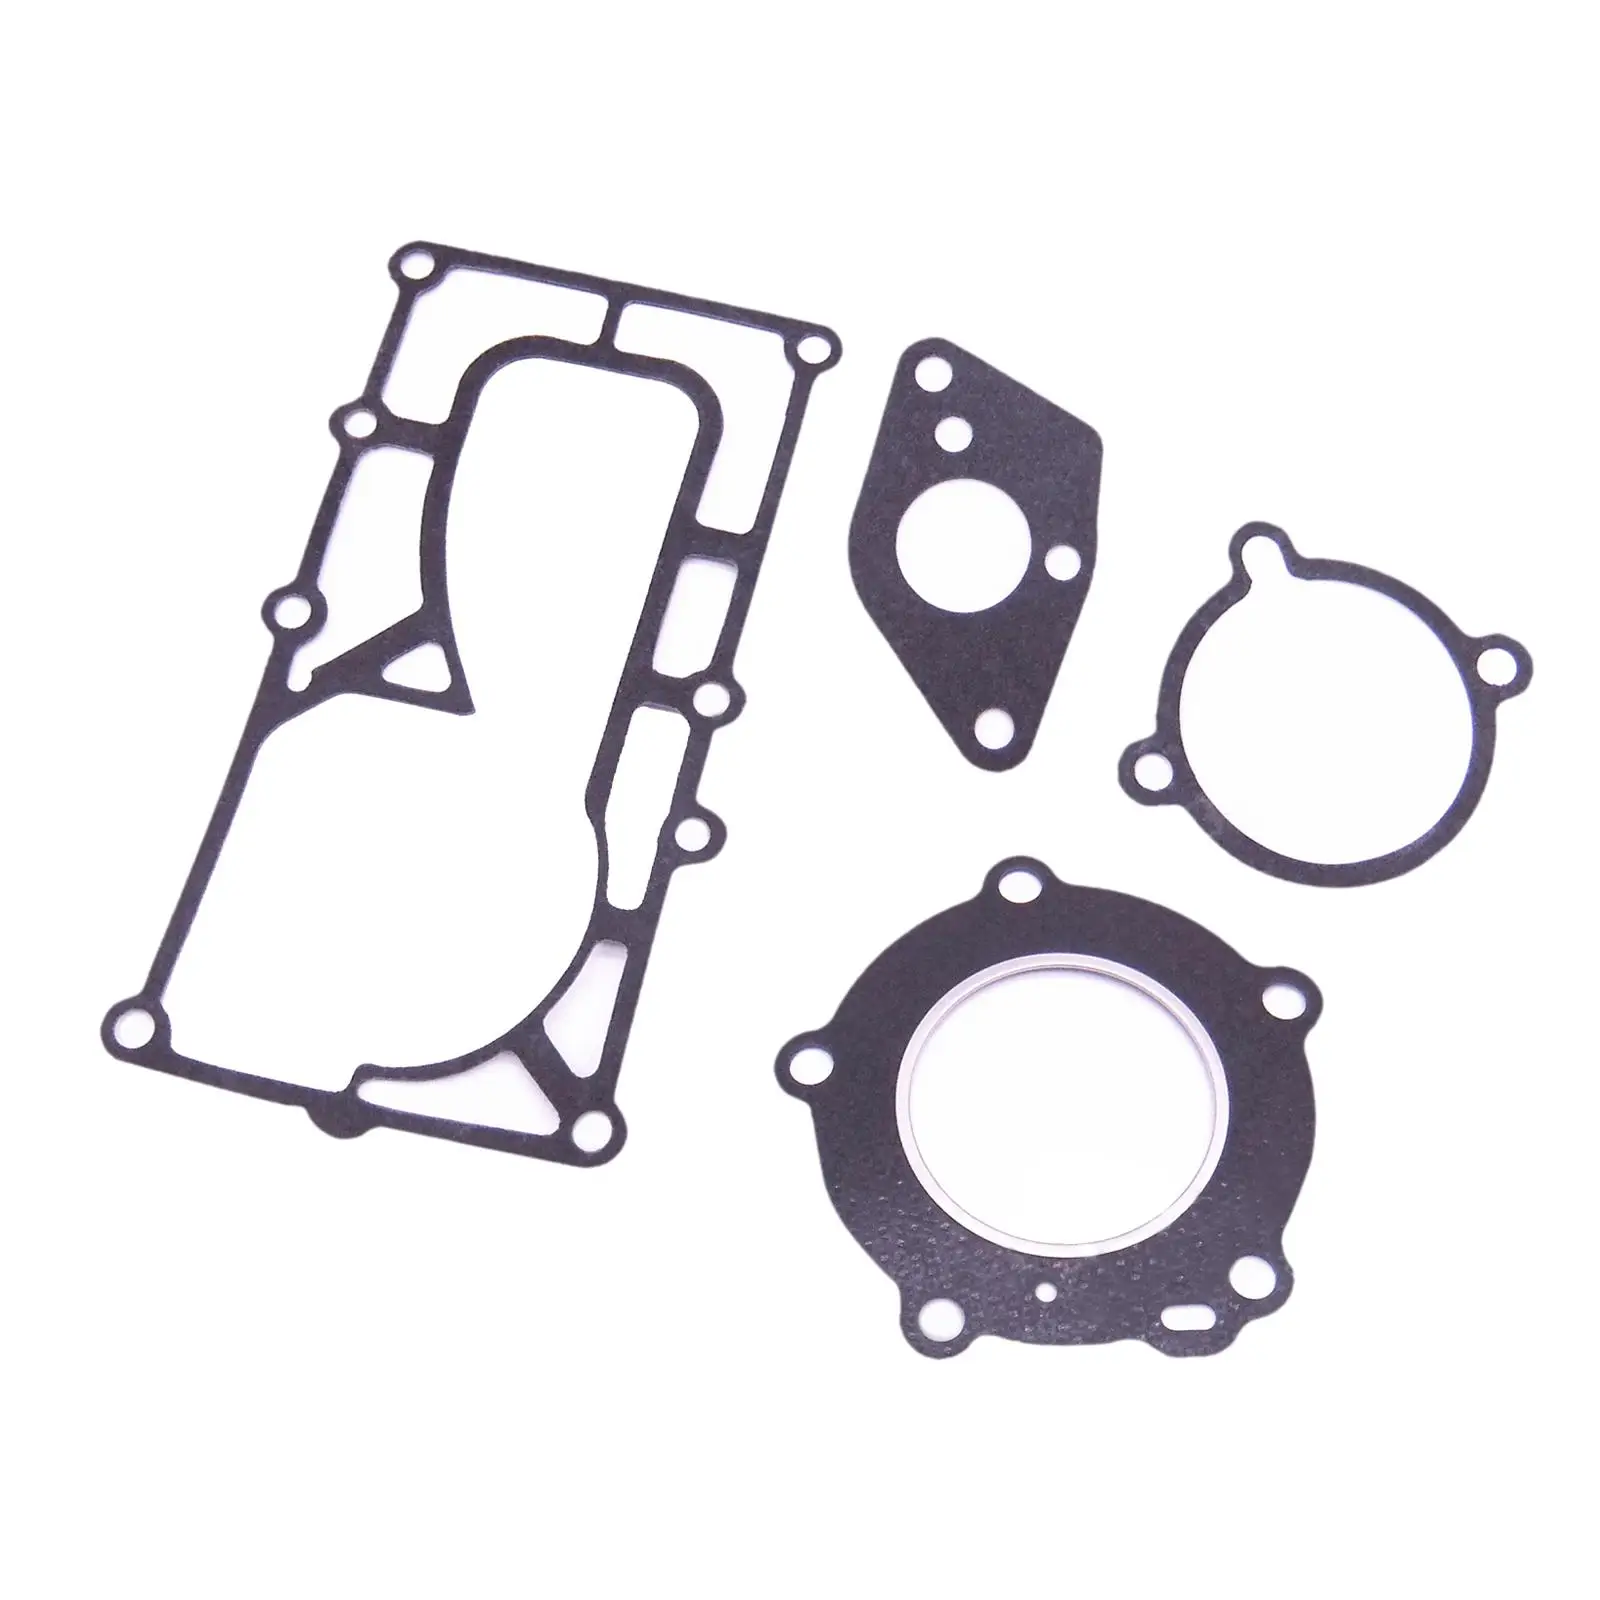 Seal Gasket Kit 36961-0120M 36901-2140M Boat Motor Fit for Nissan 4HP 5HP